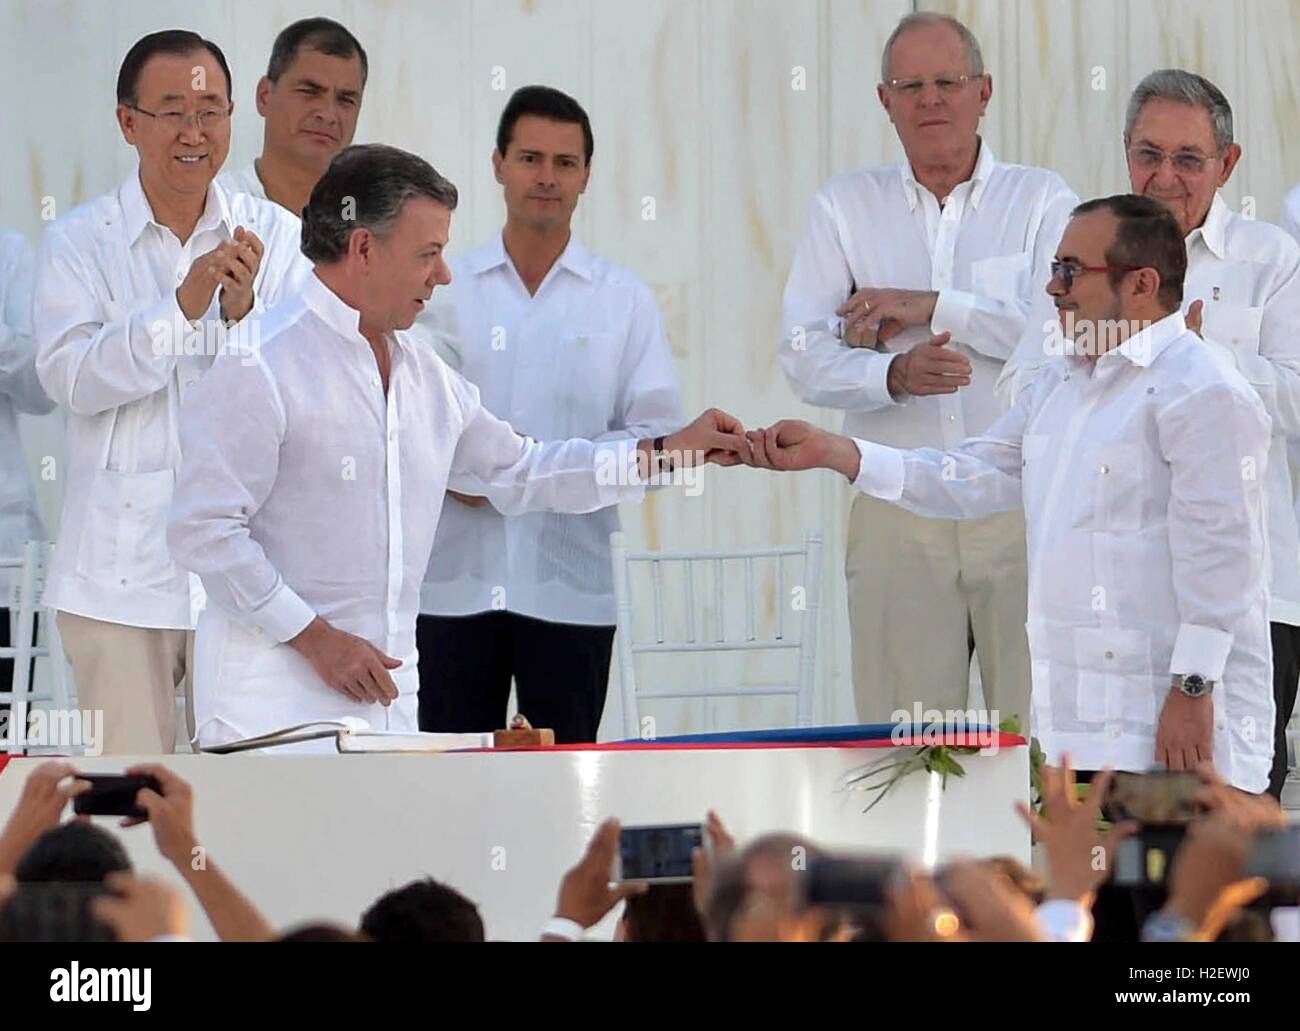 Cartagena, Colombia. 26th September, 2016. Colombian President Juan Manuel Santos, hands the pen to commander of the FARC Rodrigo Londono, right, as world leaders look on during a signing ceremony September 26, 2016 in Cartagena, Colombia. The agreement ends 50 years of armed conflict between the government and leftist rebel forces. Credit:  Planetpix/Alamy Live News Stock Photo